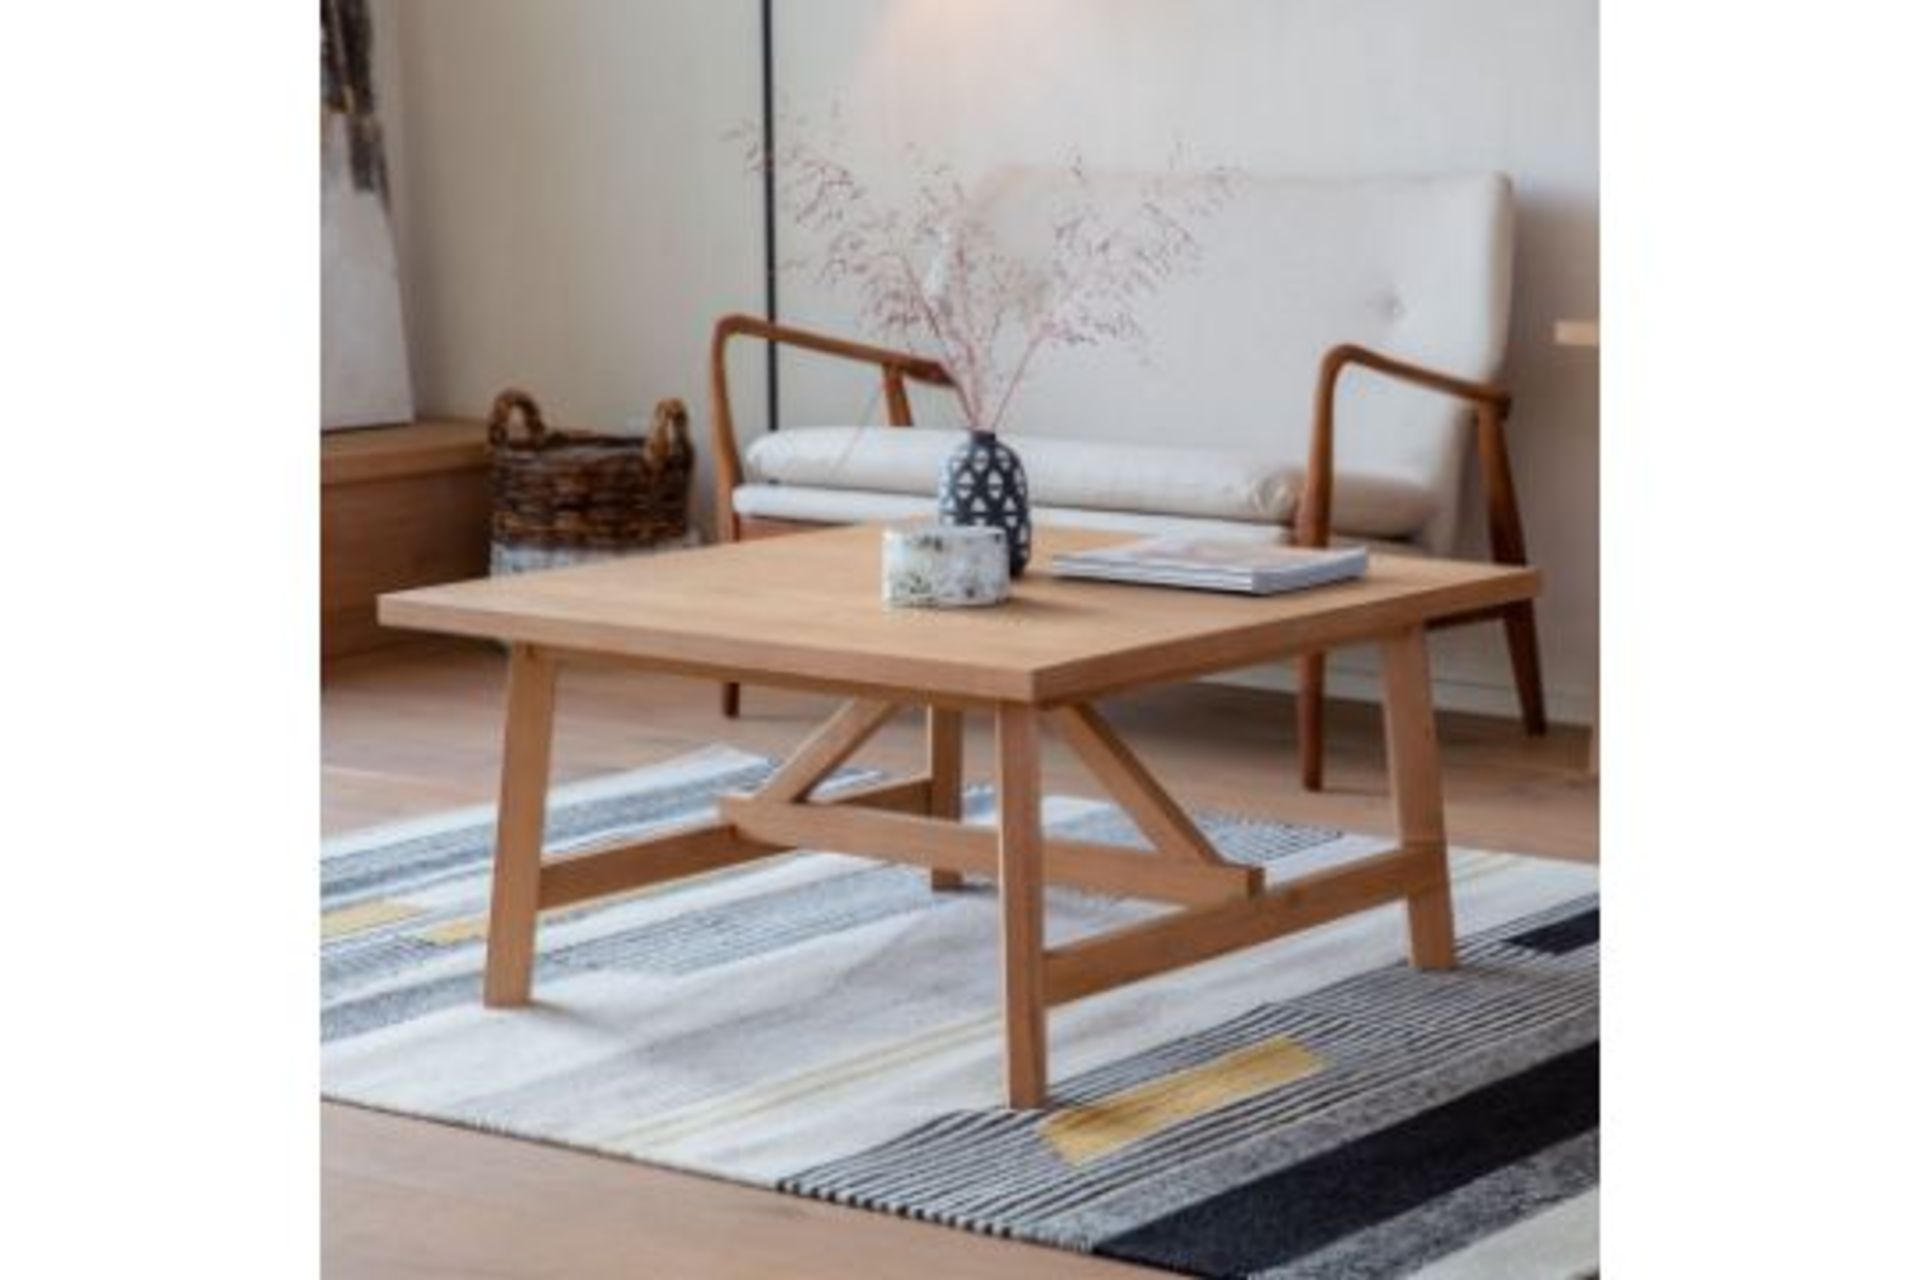 Clapham Coffee Table Is The Latest Addition To Our Range Of Modern And Contemporary Furniture